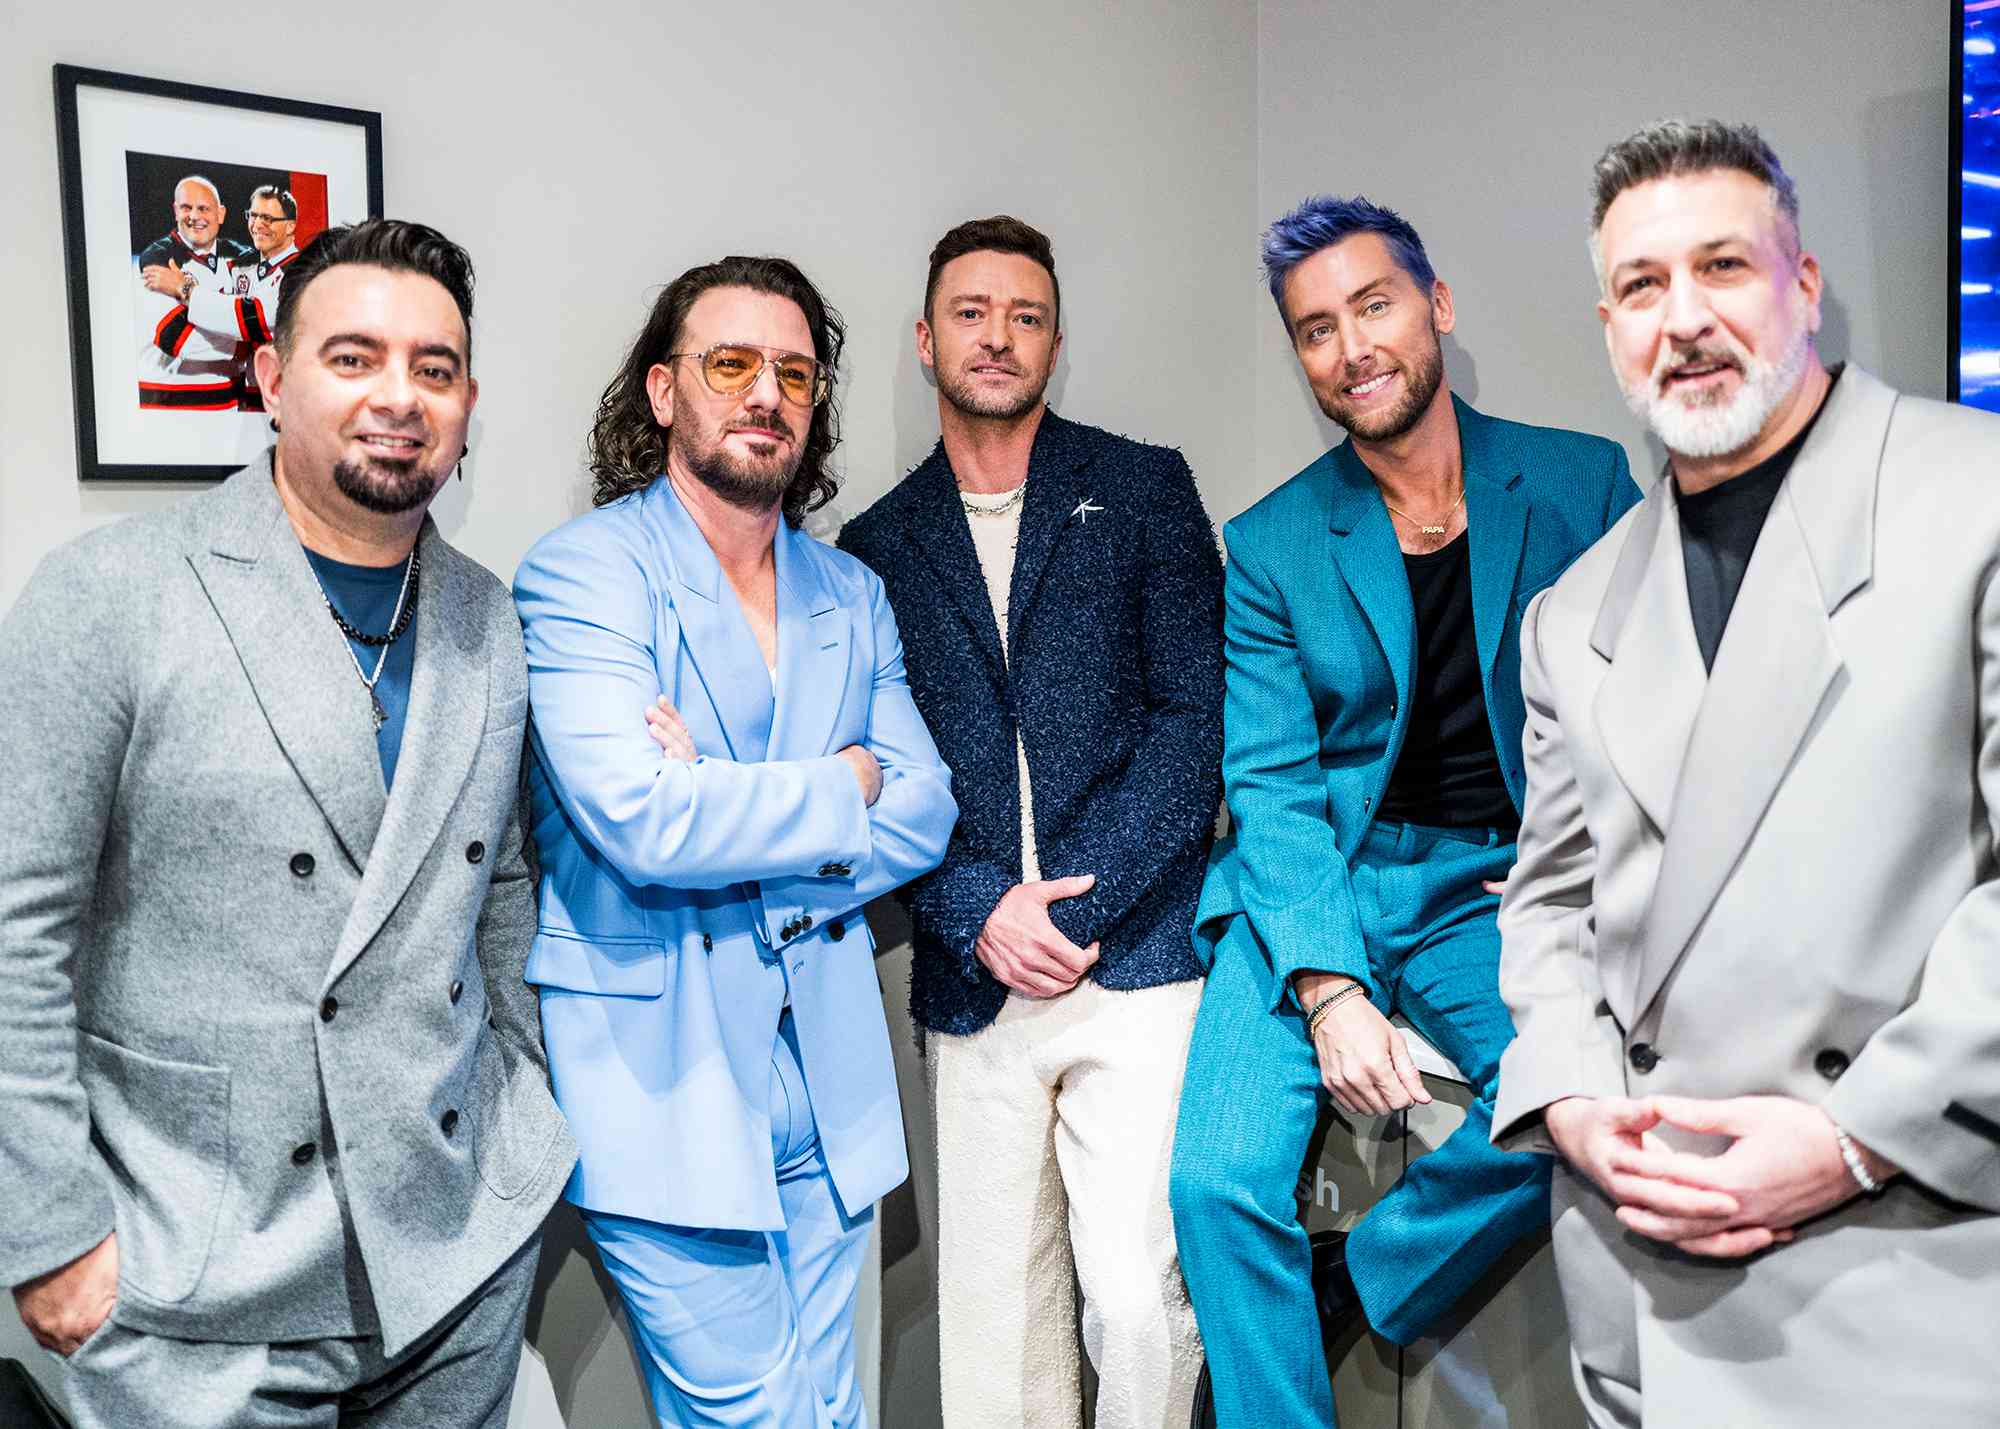 Chris Kirkpatrick, JC Chasez, Justin Timberlake, Lance Bass and Joey Fatone of NSYNC seen backstage during the 2023 Video Music Awards at Prudential Center 